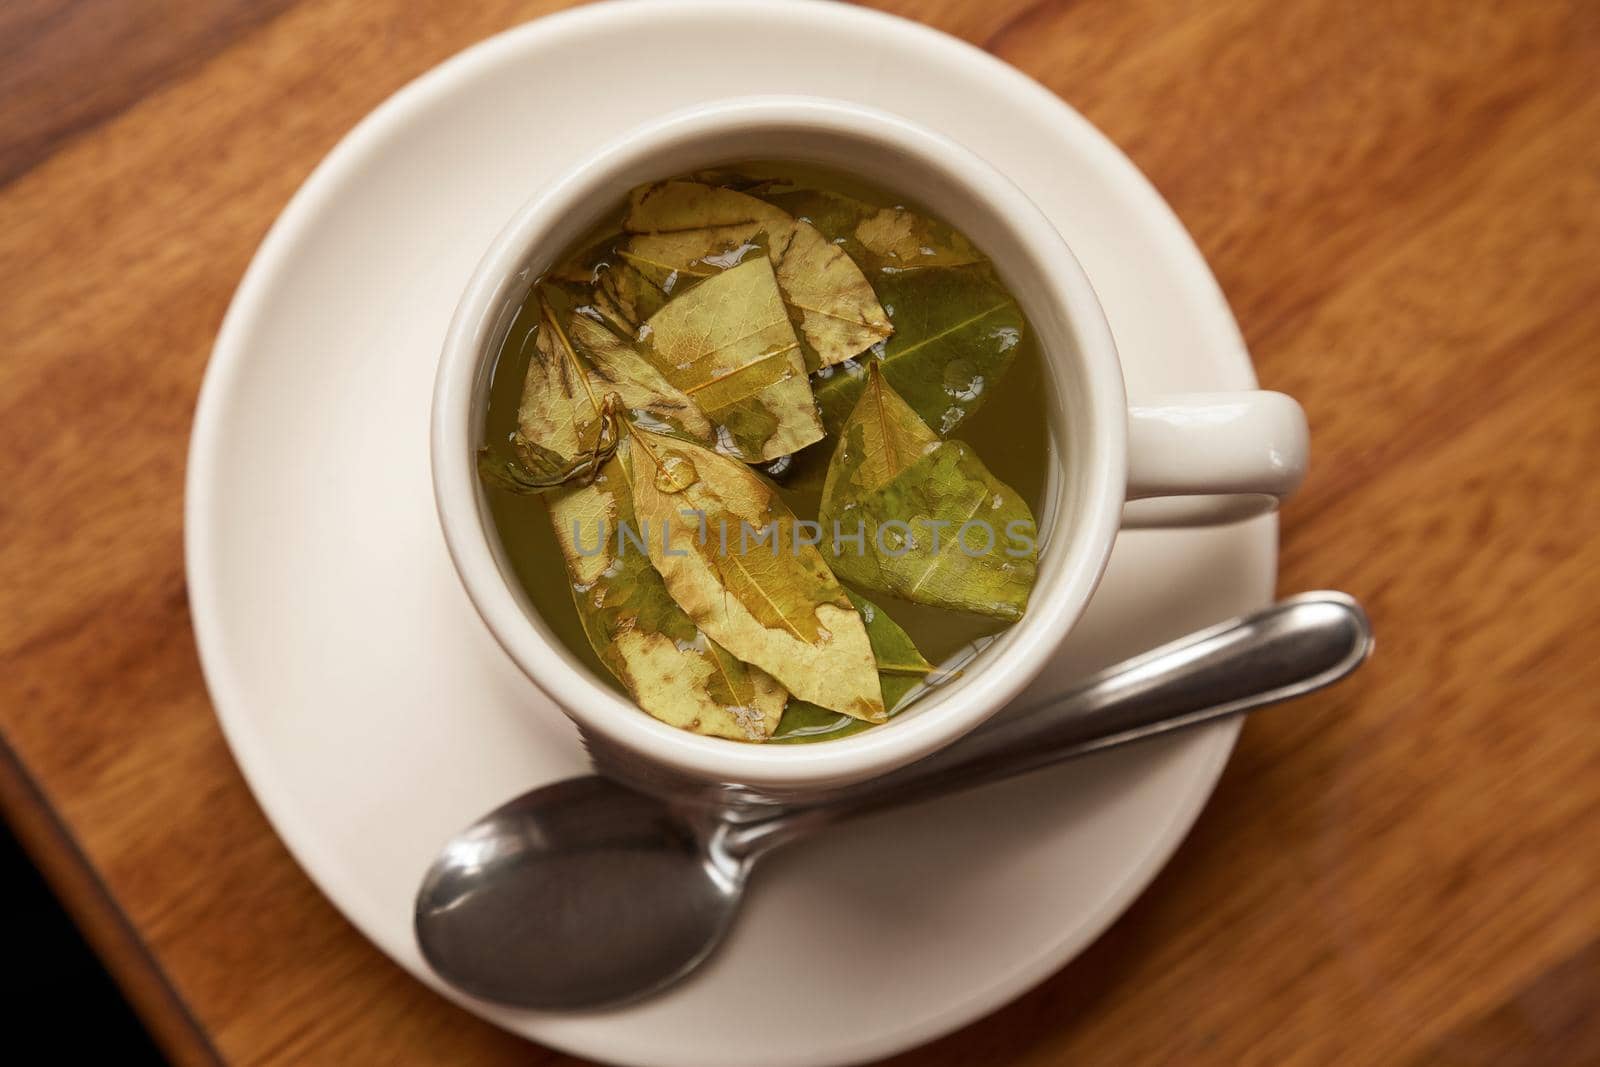 Cup of Coca Tea on Wooden table. Traditional refreshment for people in South America, especially in Peru and Bolivia.